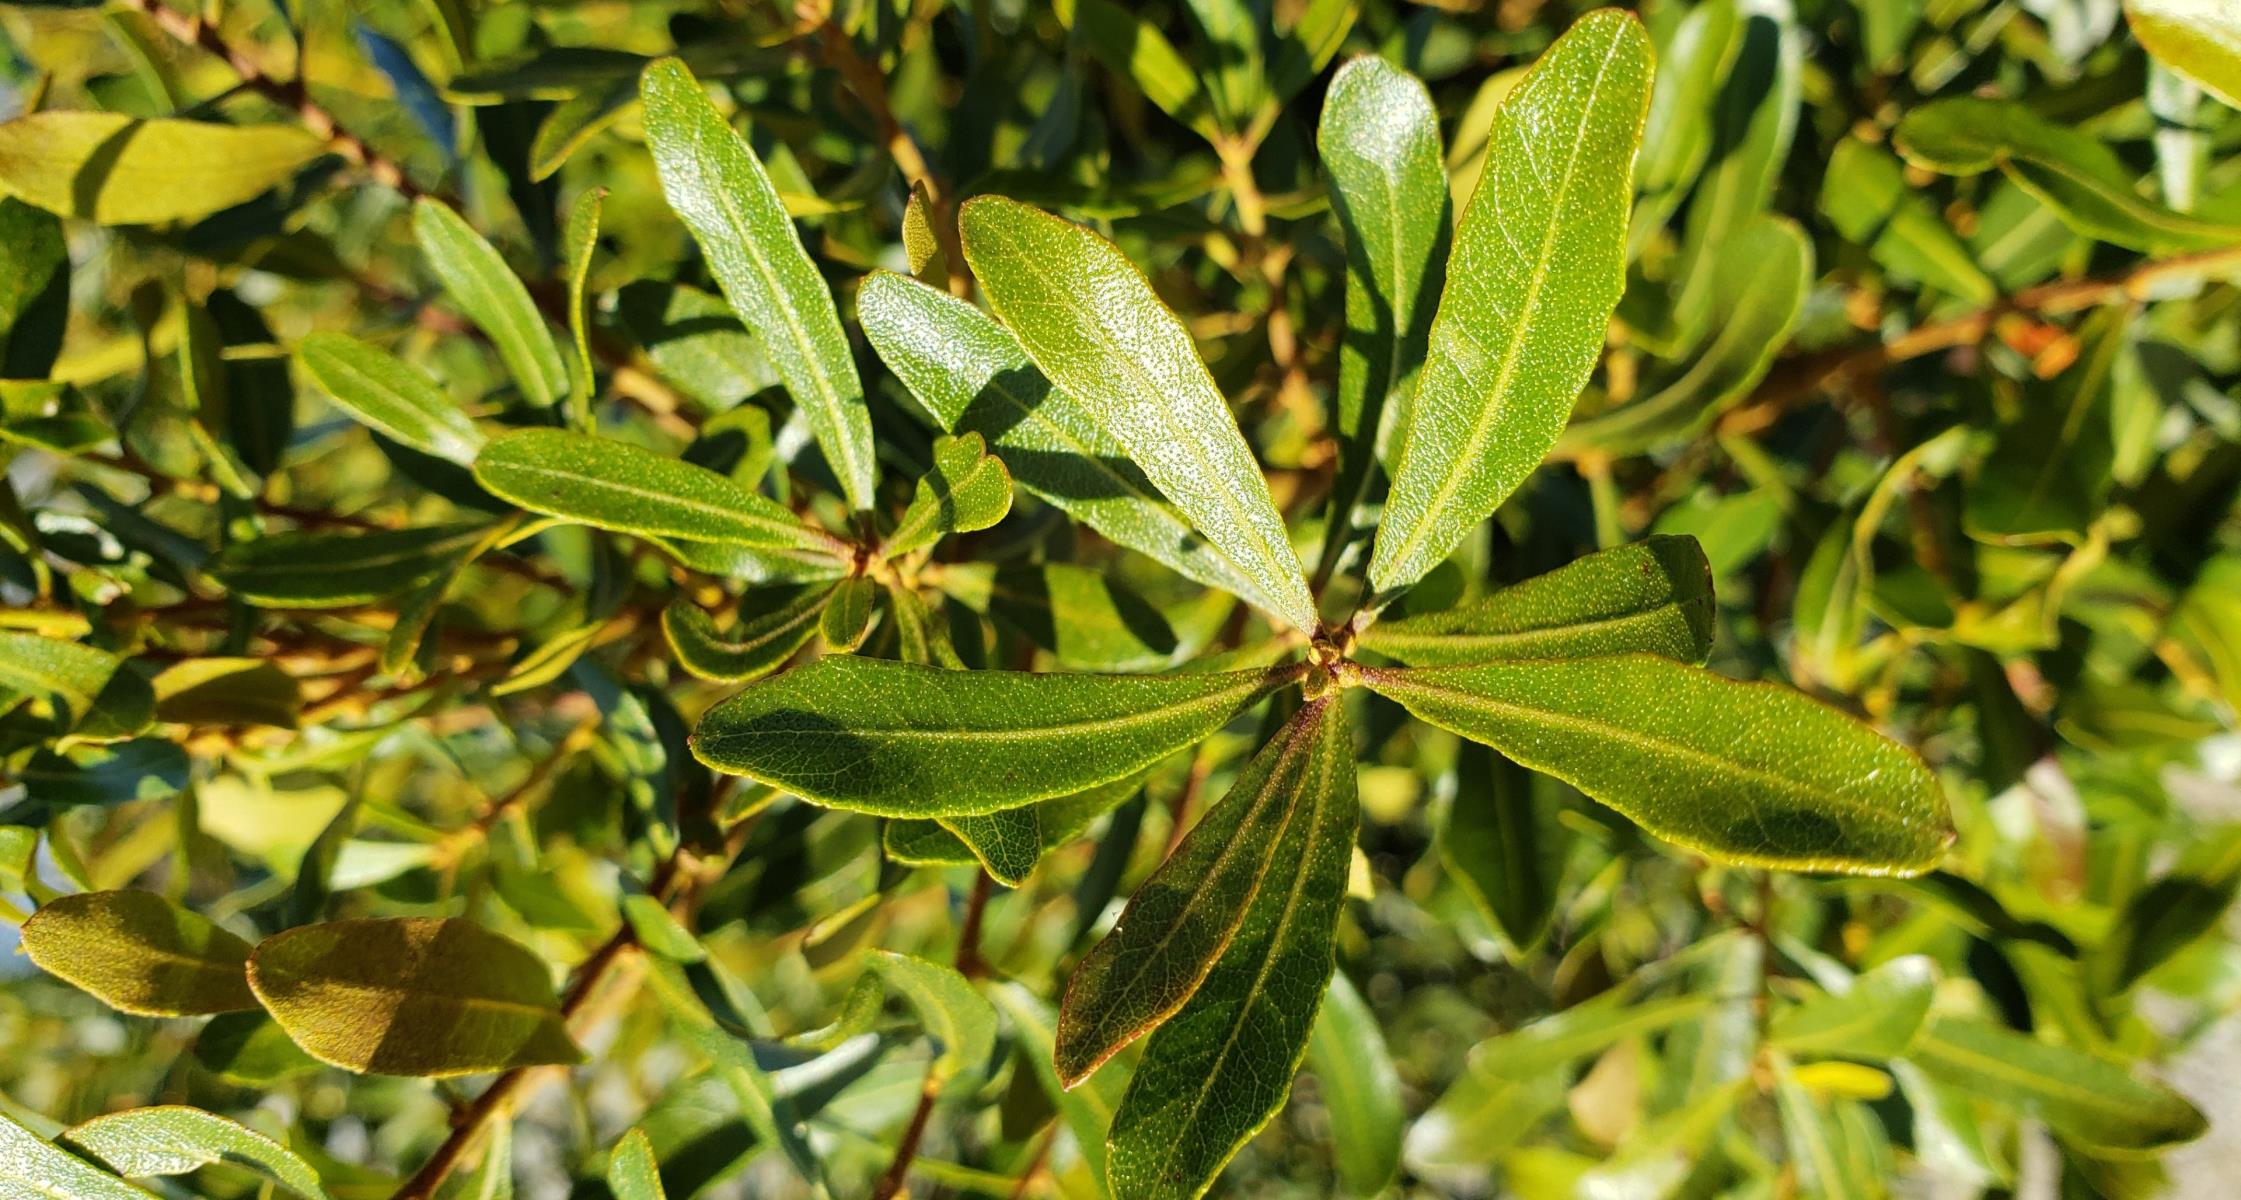 #TeachingTuesday: Southern Waxmyrtle